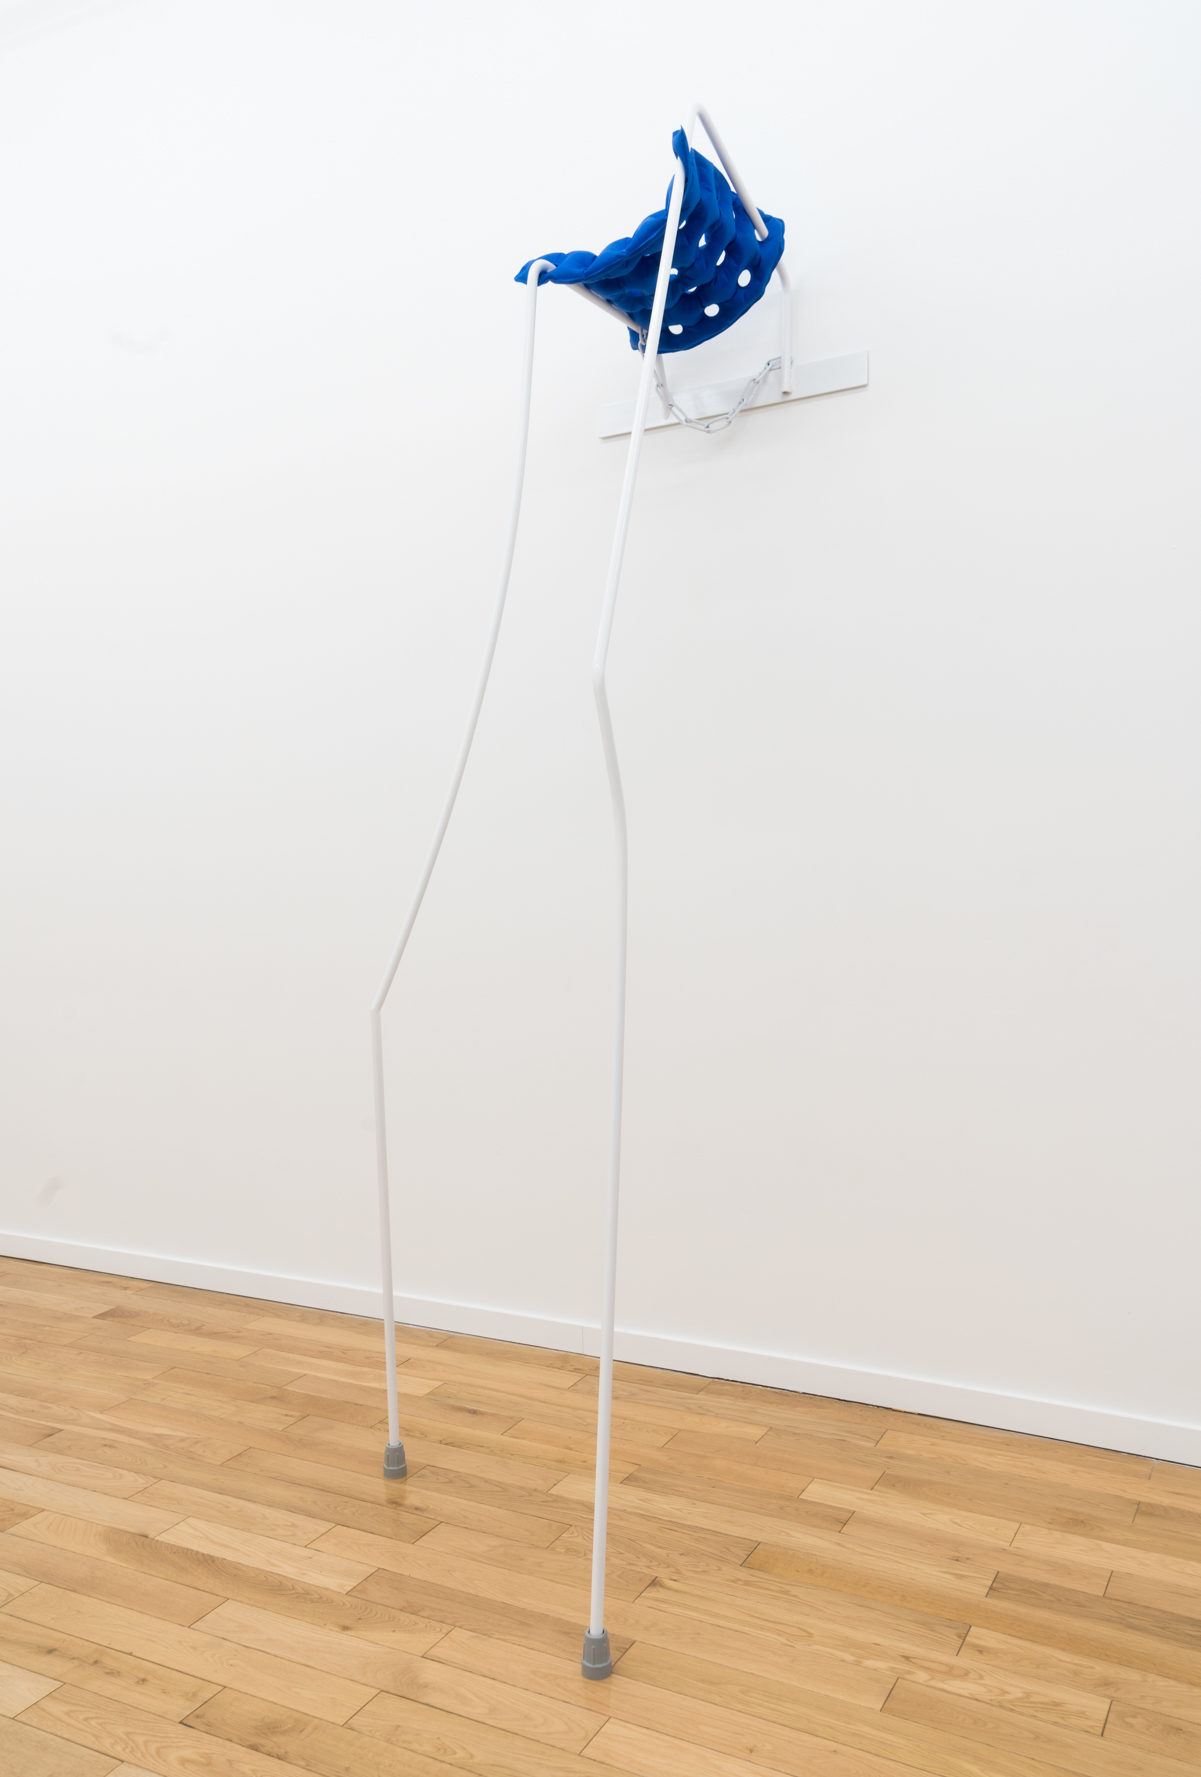 blue sculpture coming off wall attached to white rods that flow down in a funny structure and have gray stoppers